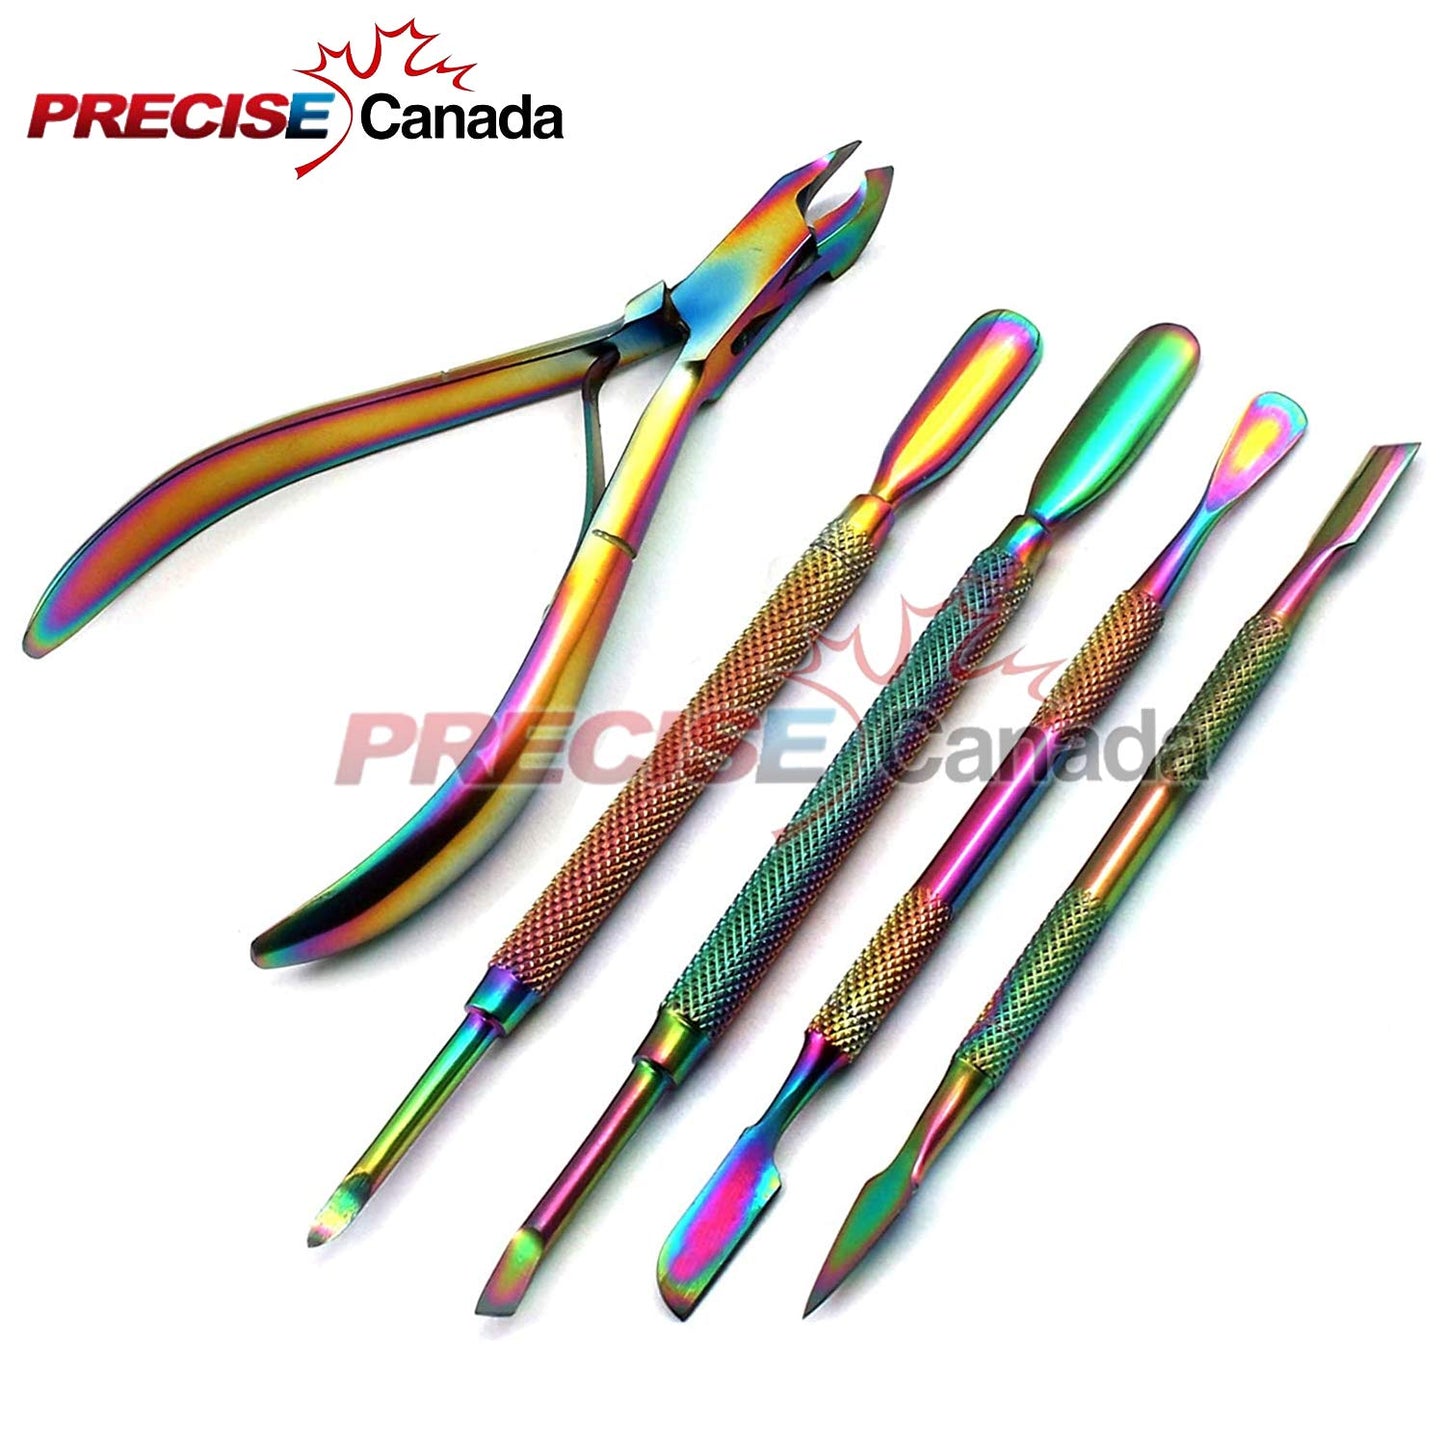 PRECISE CANADA: CUTICLE PUSHER REMOVER WITH NIPPER RAINBOW STAINLESS STEEL MANICURE NAIL ART TOOL SET